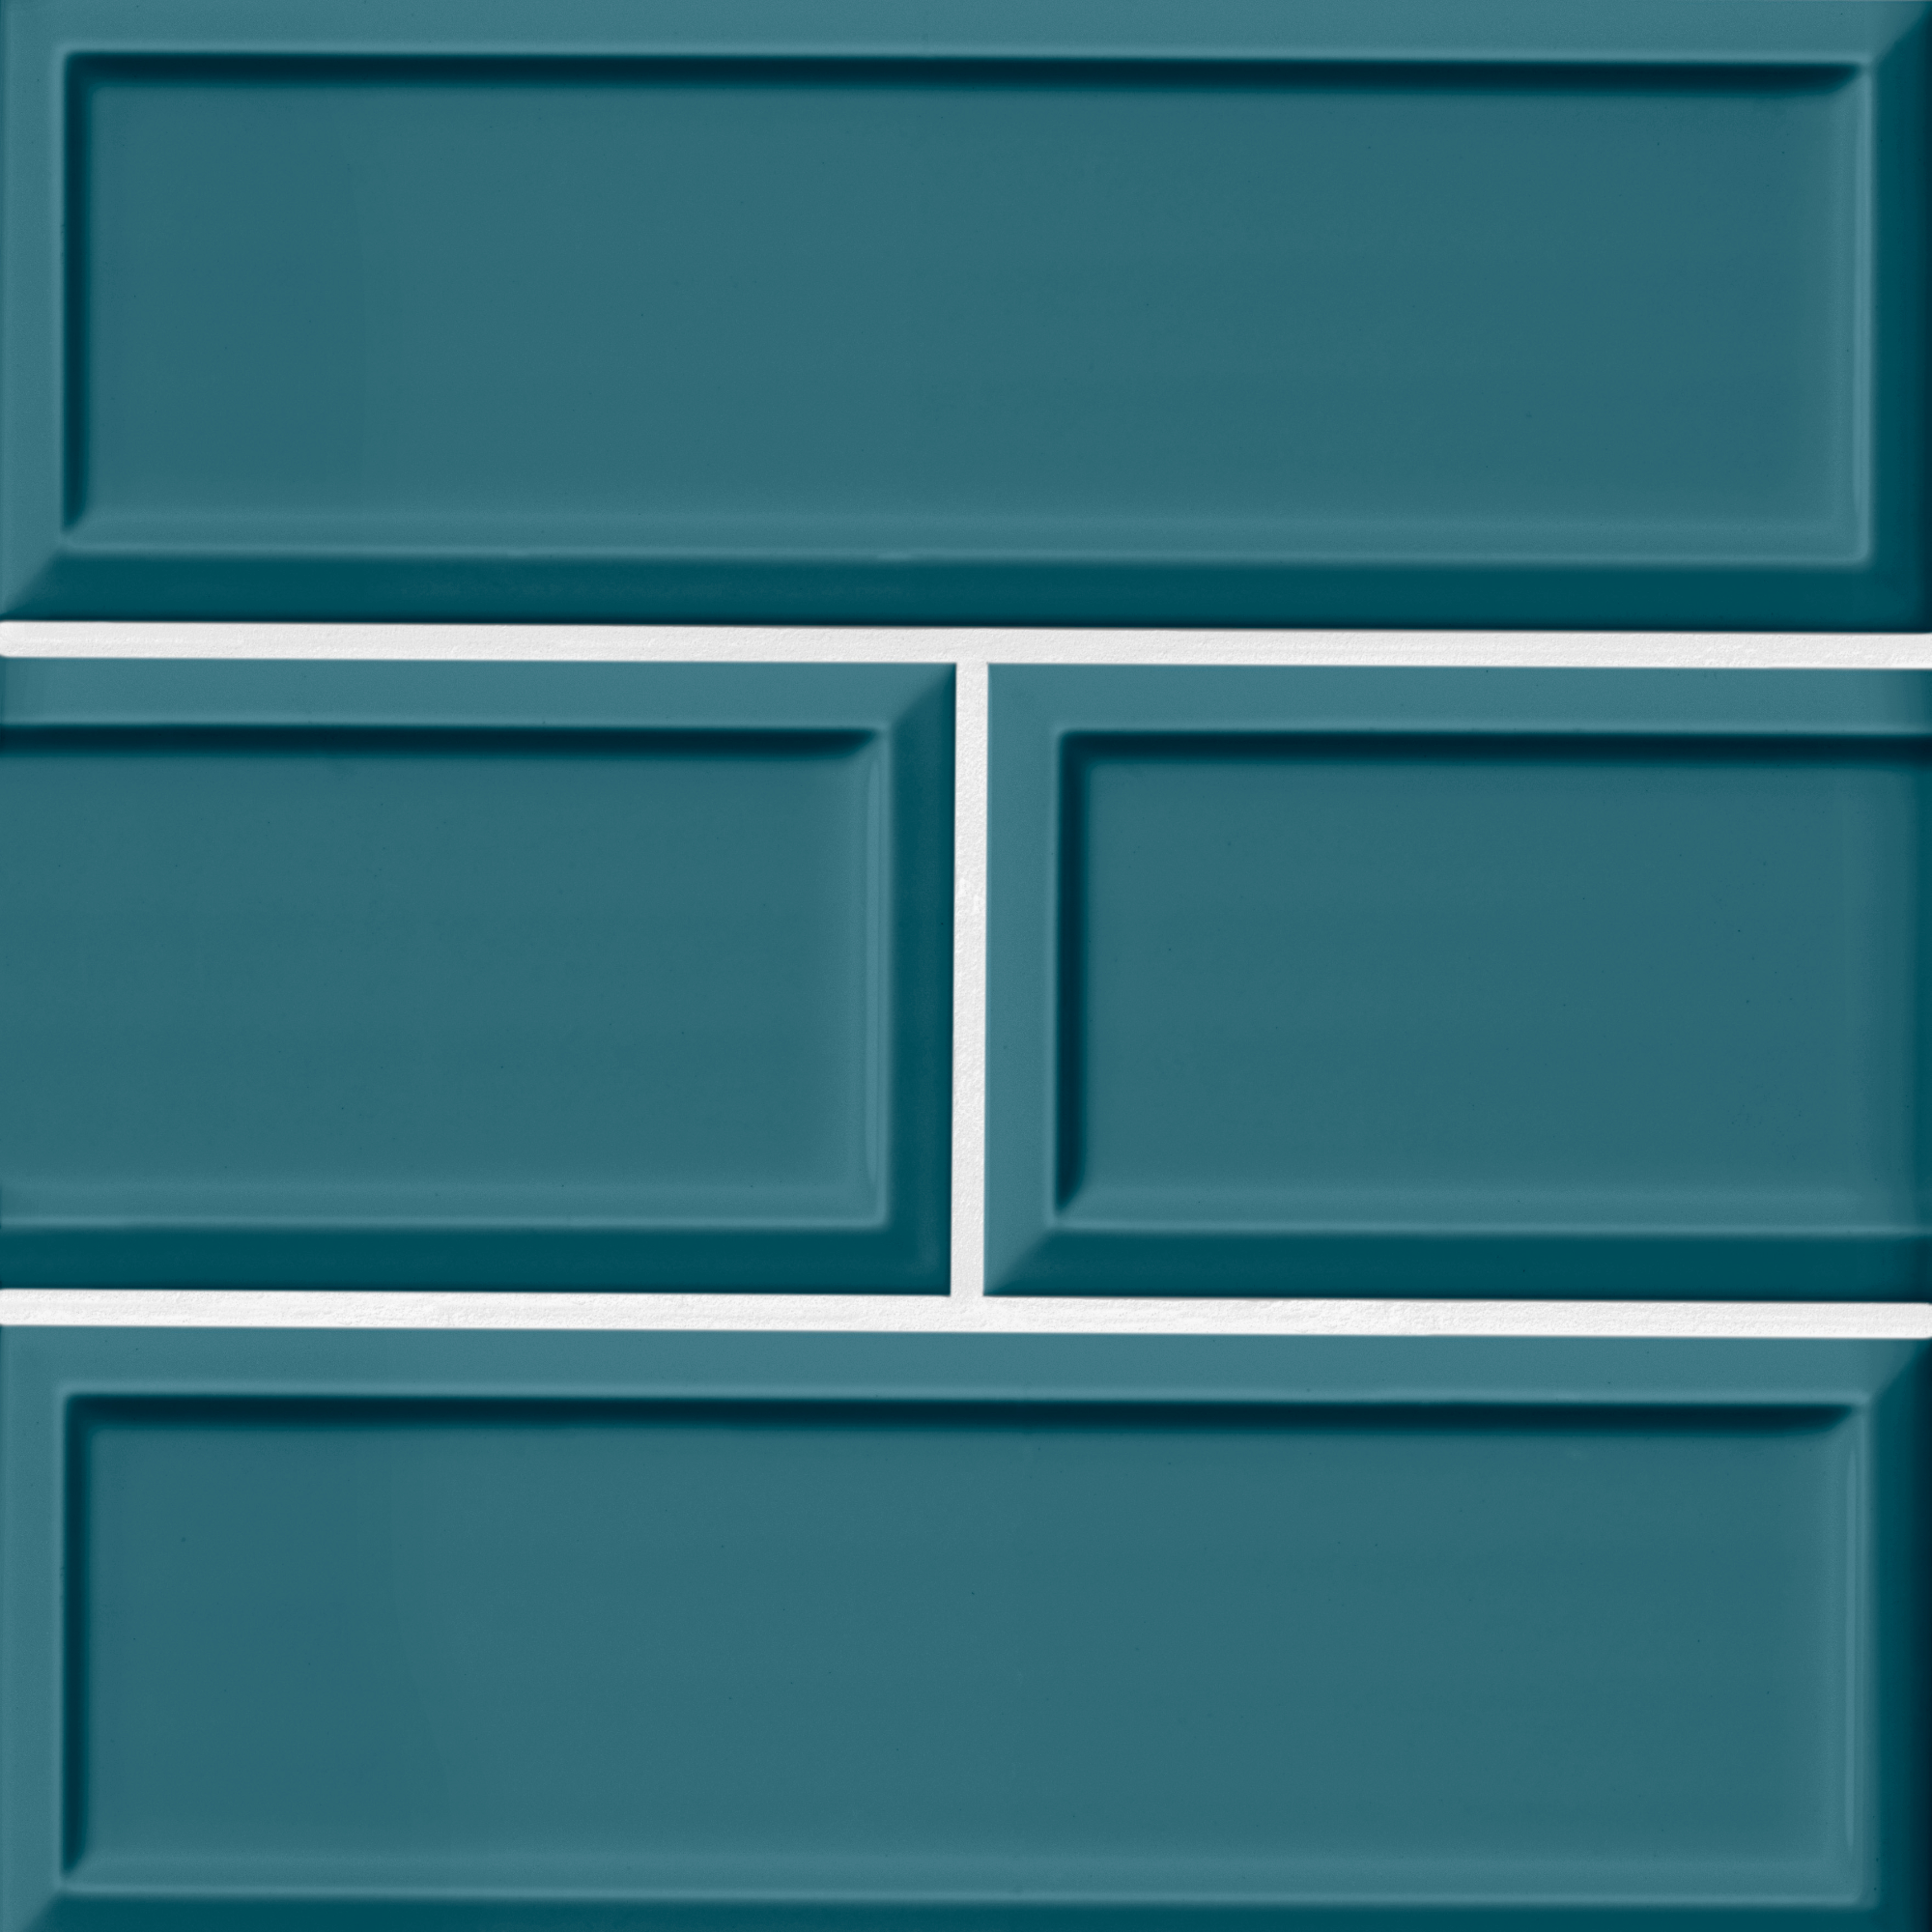 Imperial Turquoise Frame Gls10x30cm